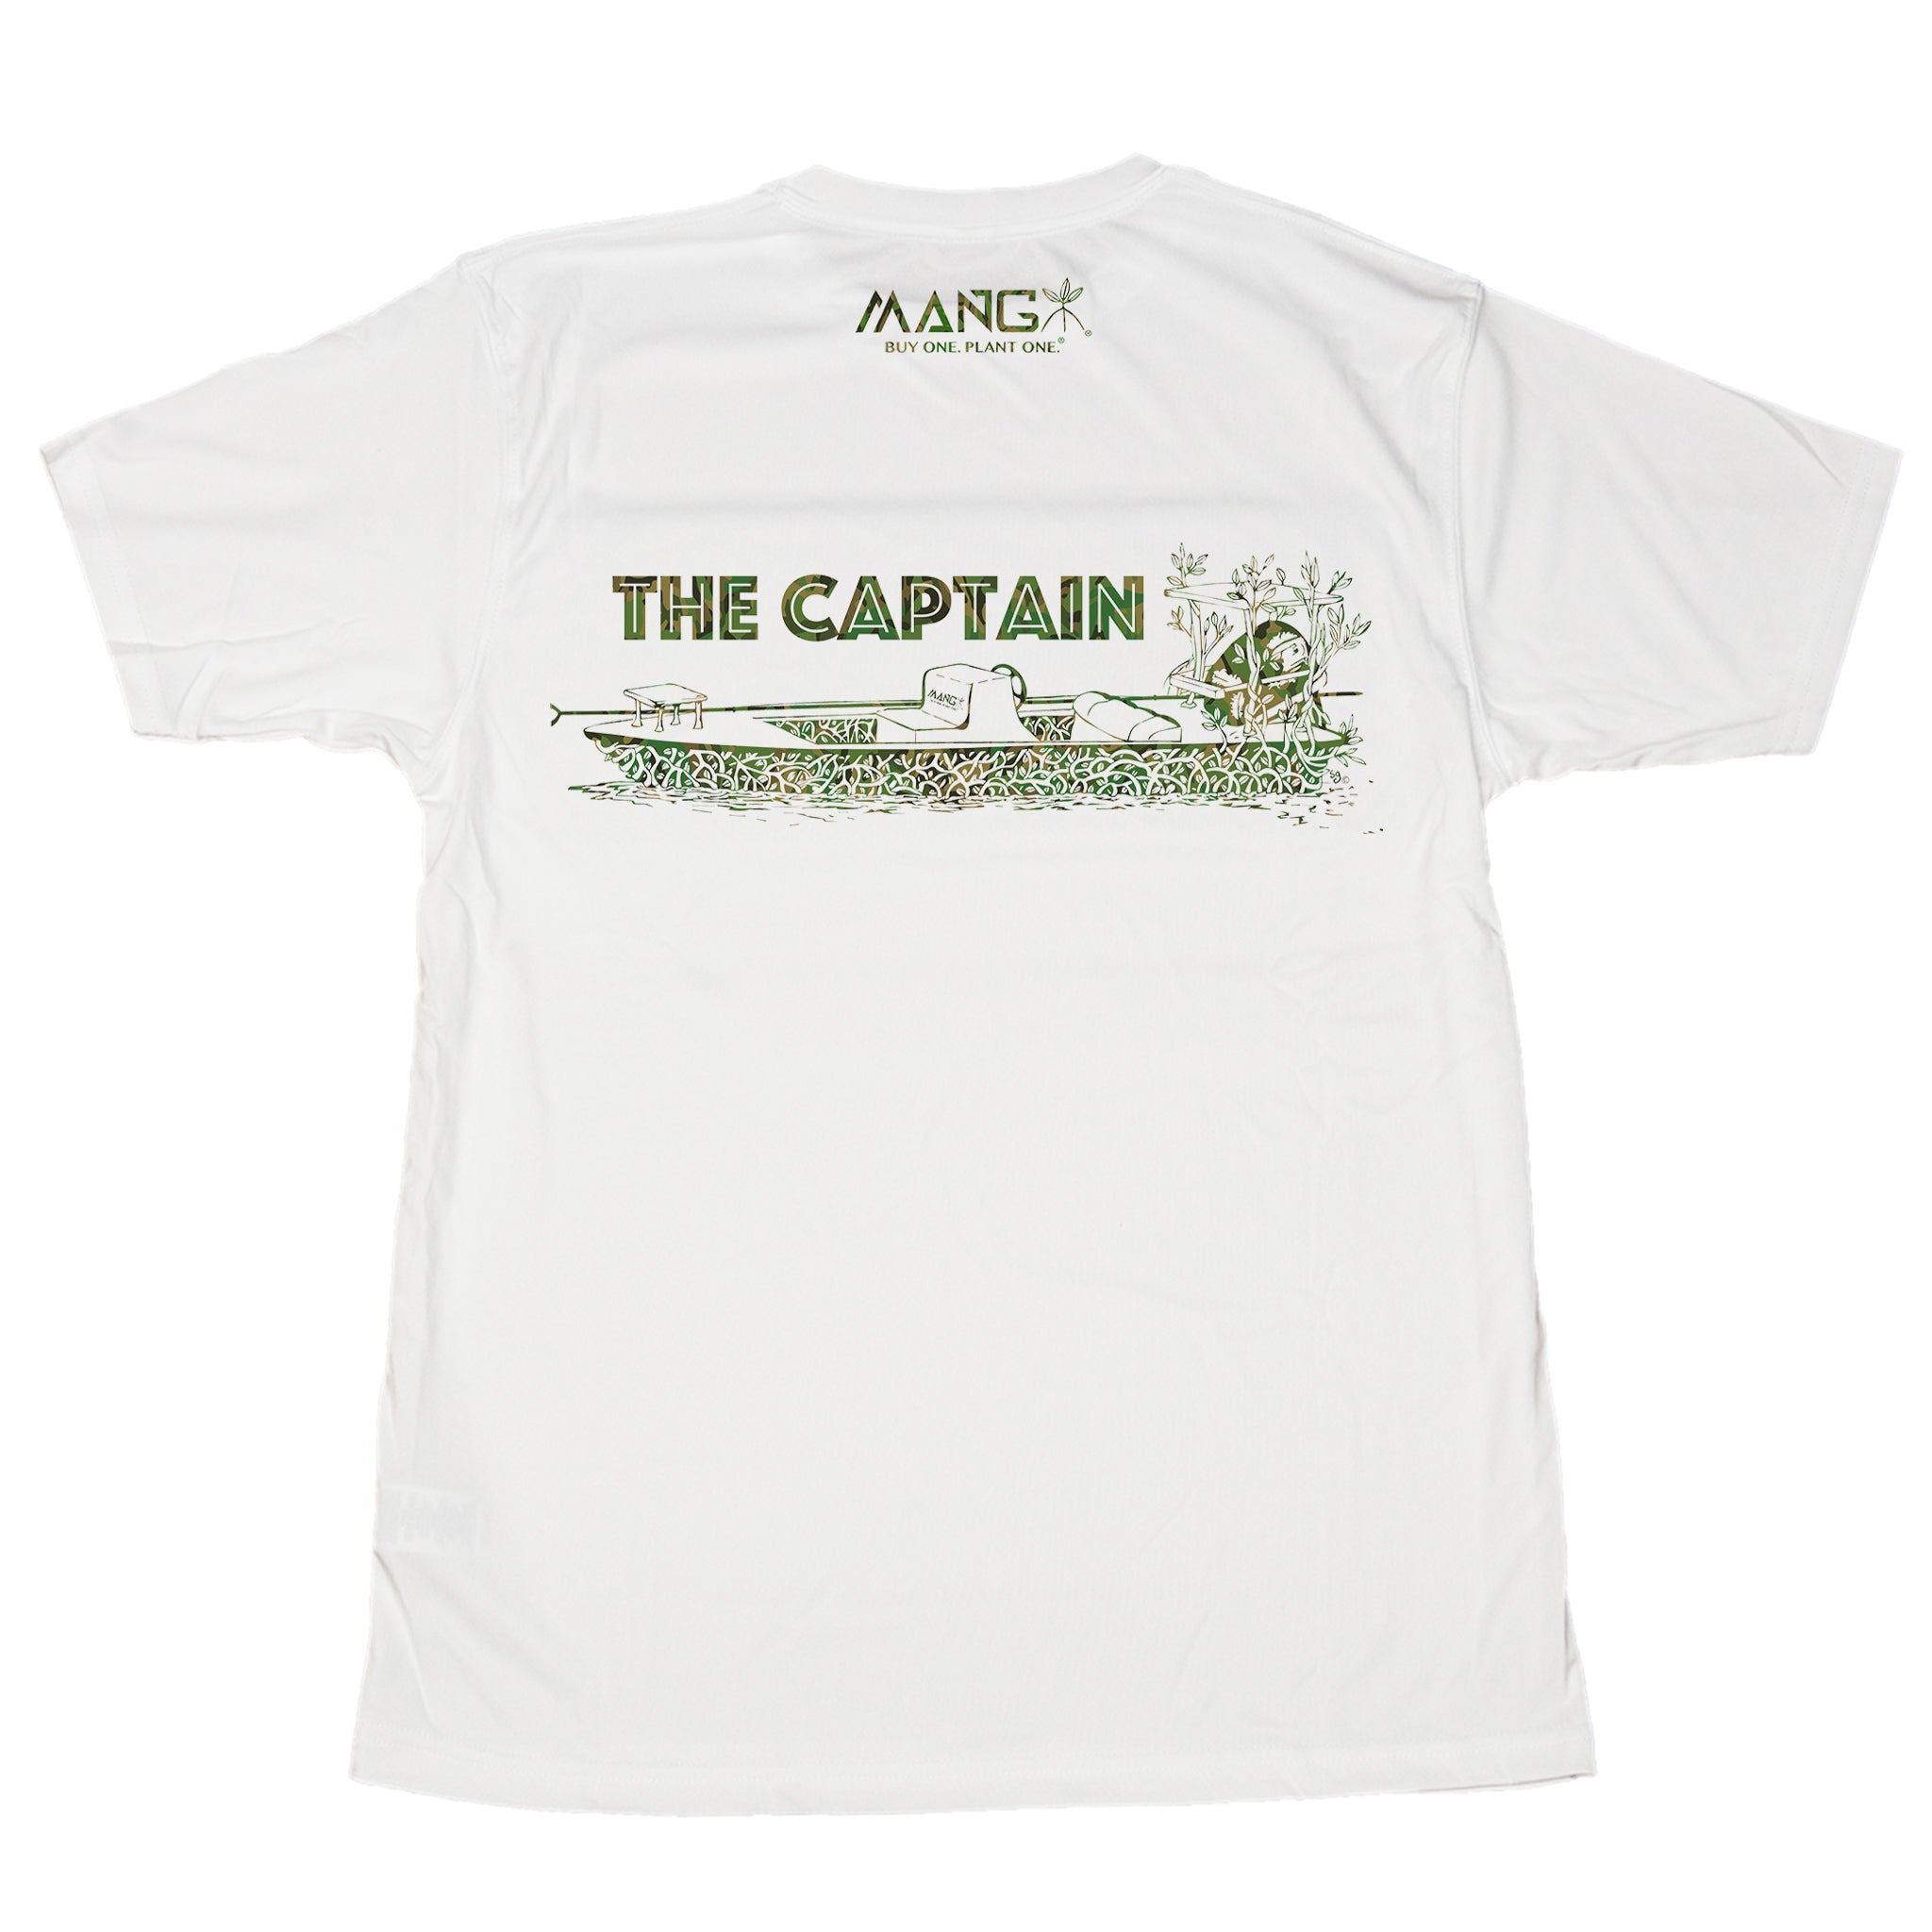 MANG The Captain - SS - XS-White